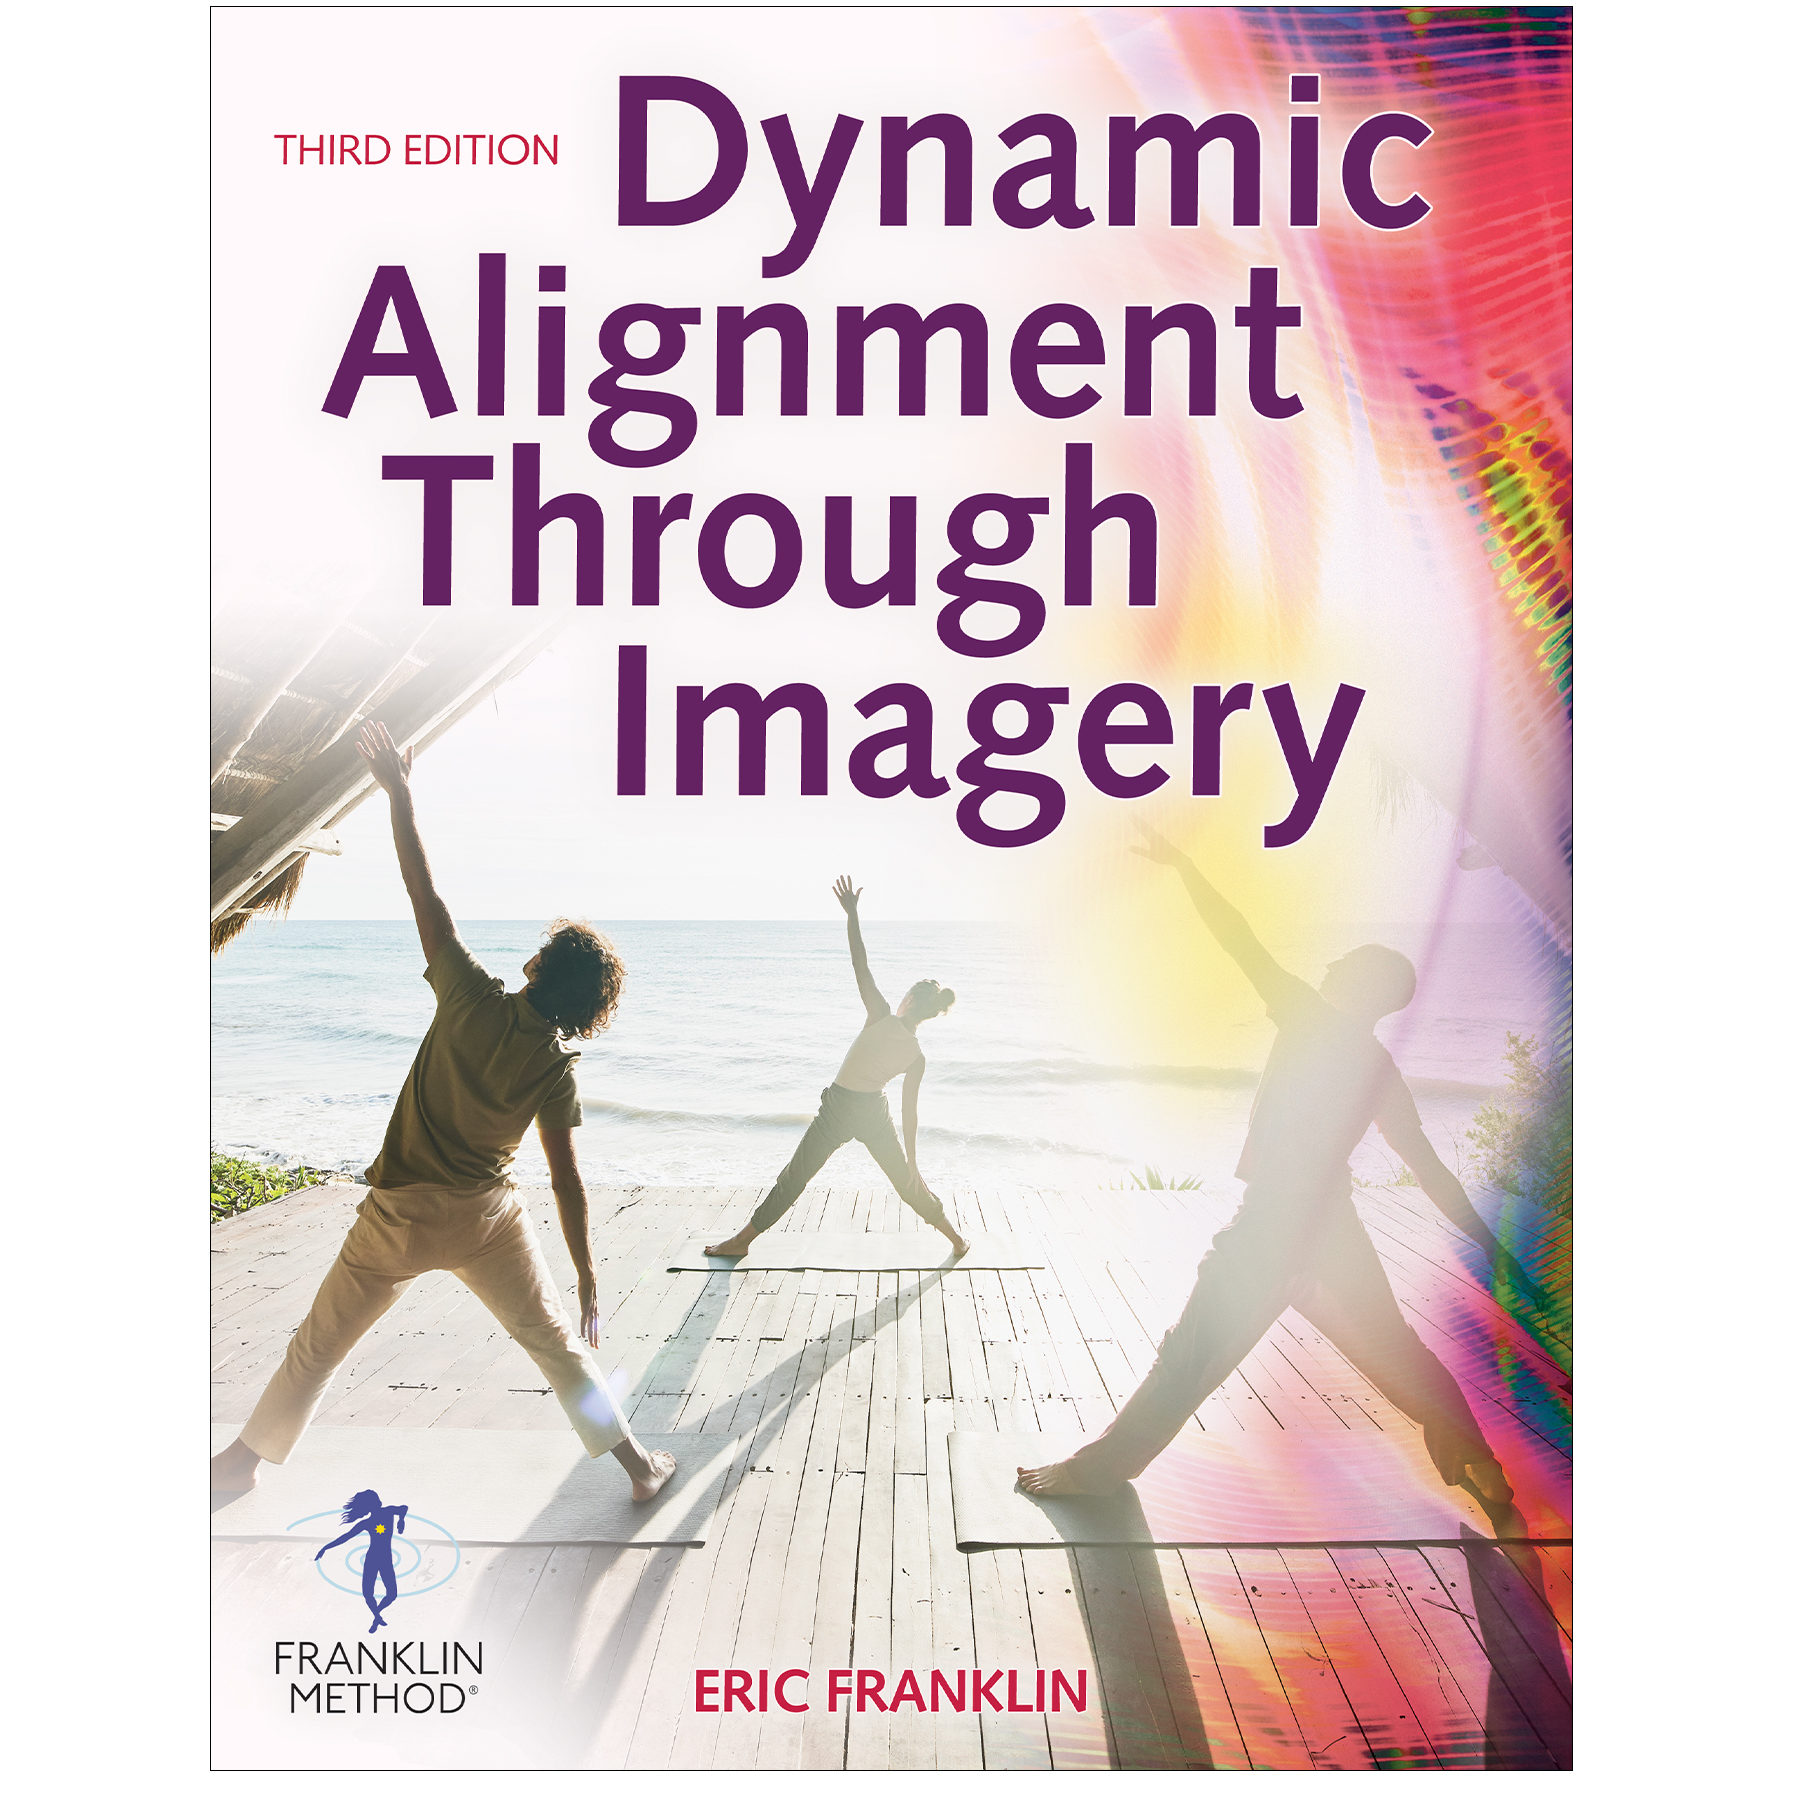 A textbook cover. Figures lunge in a yoga "triangle" pose with colorful streaks. Text reads "Dynamic Alignment Through Imagery."